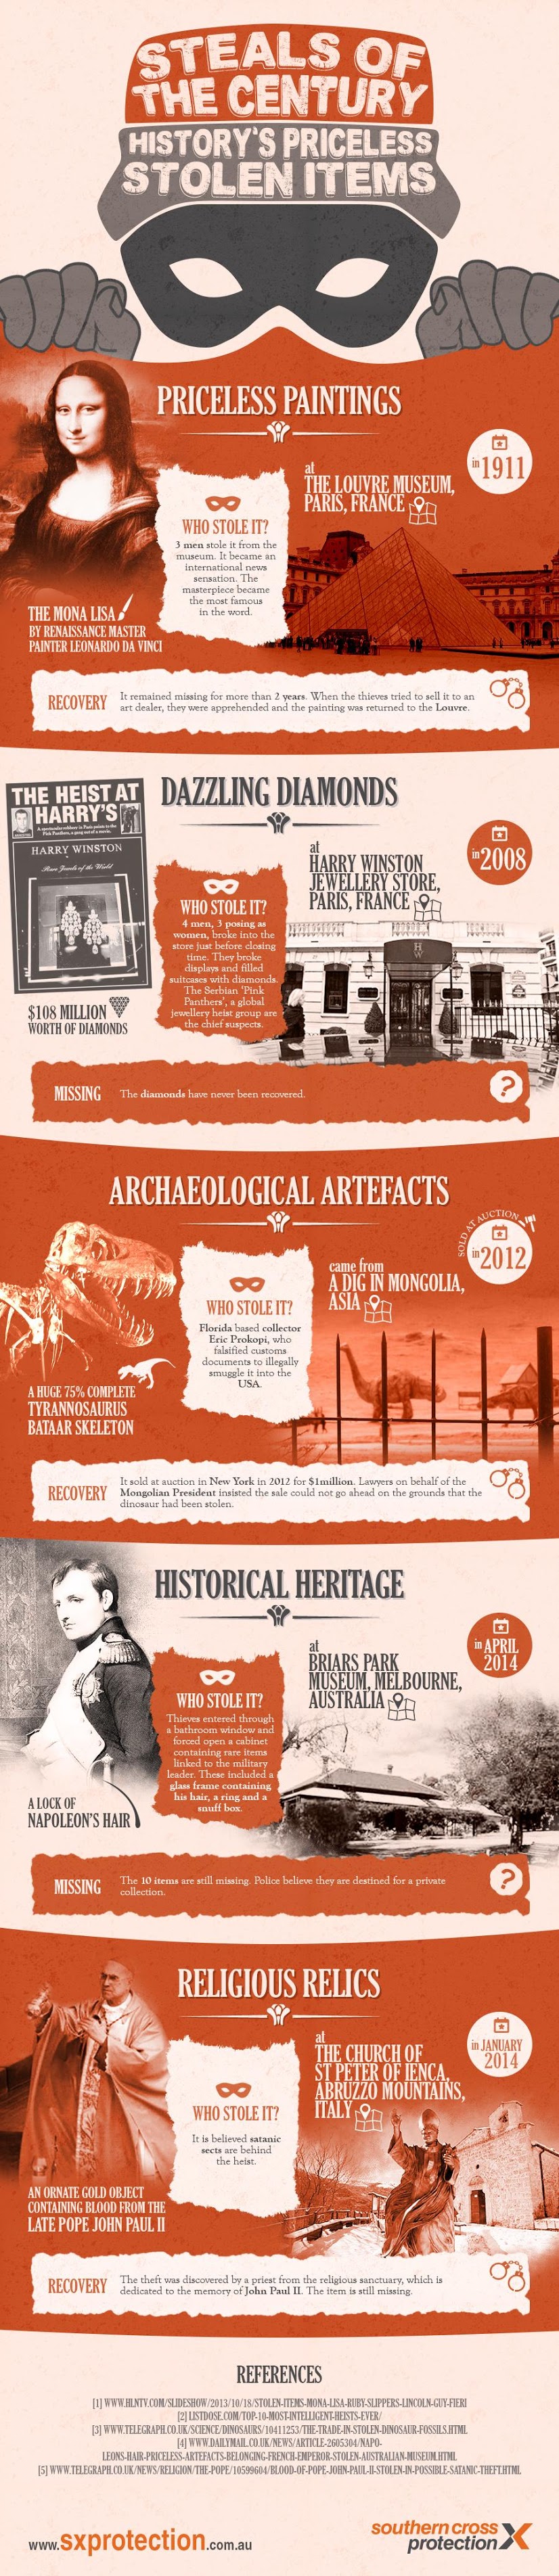 Steals of the Century, History’s Priceless Stolen Items #infographic